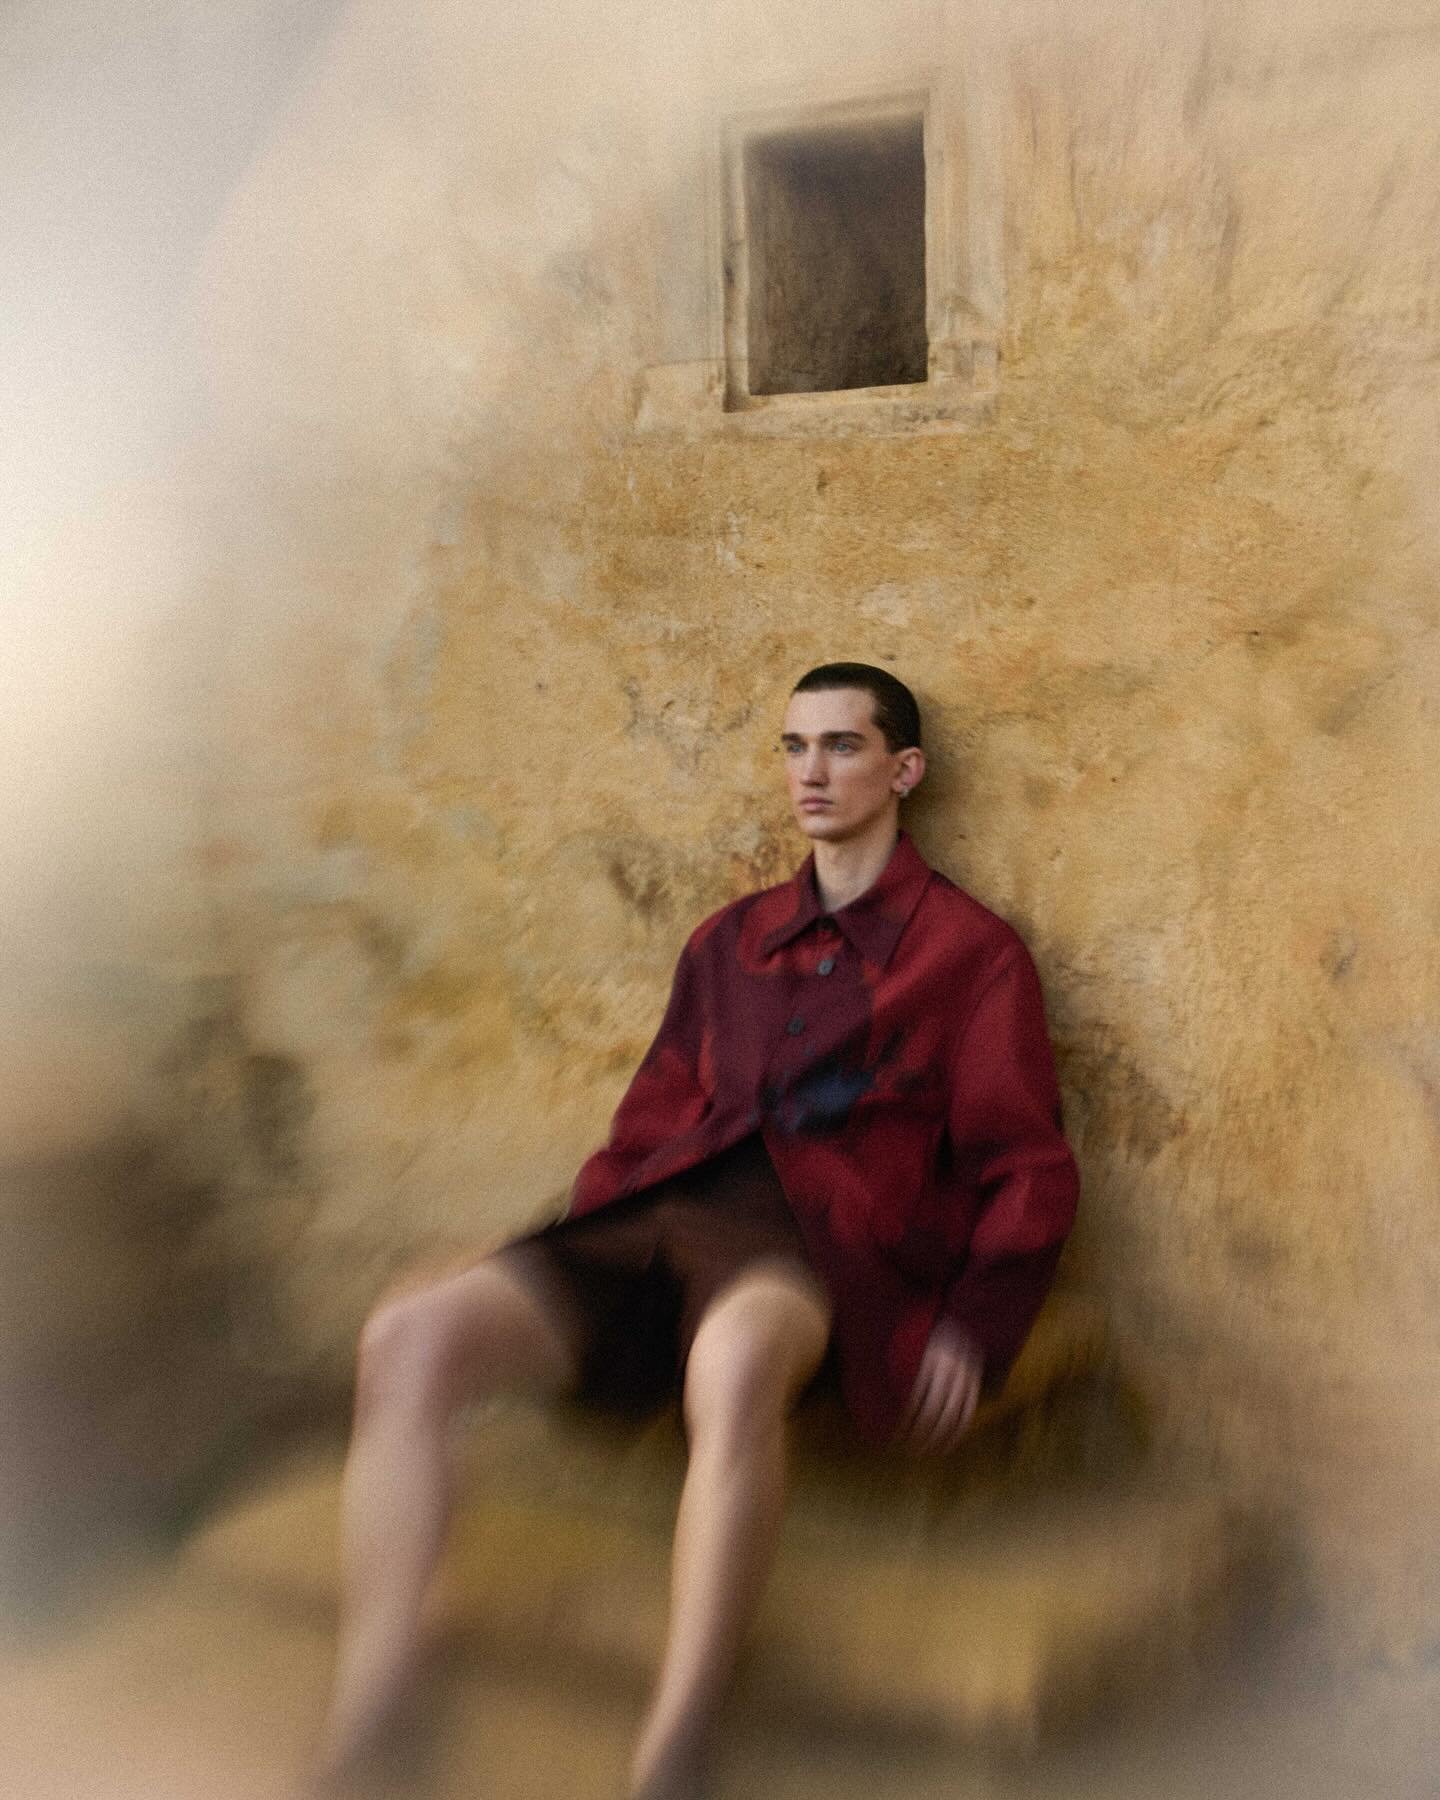 New story out for @lofficielhommesitalia.

Photography @frederico__martins 
Photographer assistants @p.g.sa @vicentesottomayor 
Styling @iampaoloturina 
Styling assistant @gloysteinsampaio.art 
Grooming @ruirocha_hairstylist 
Model @eugen2eugen 
Prod